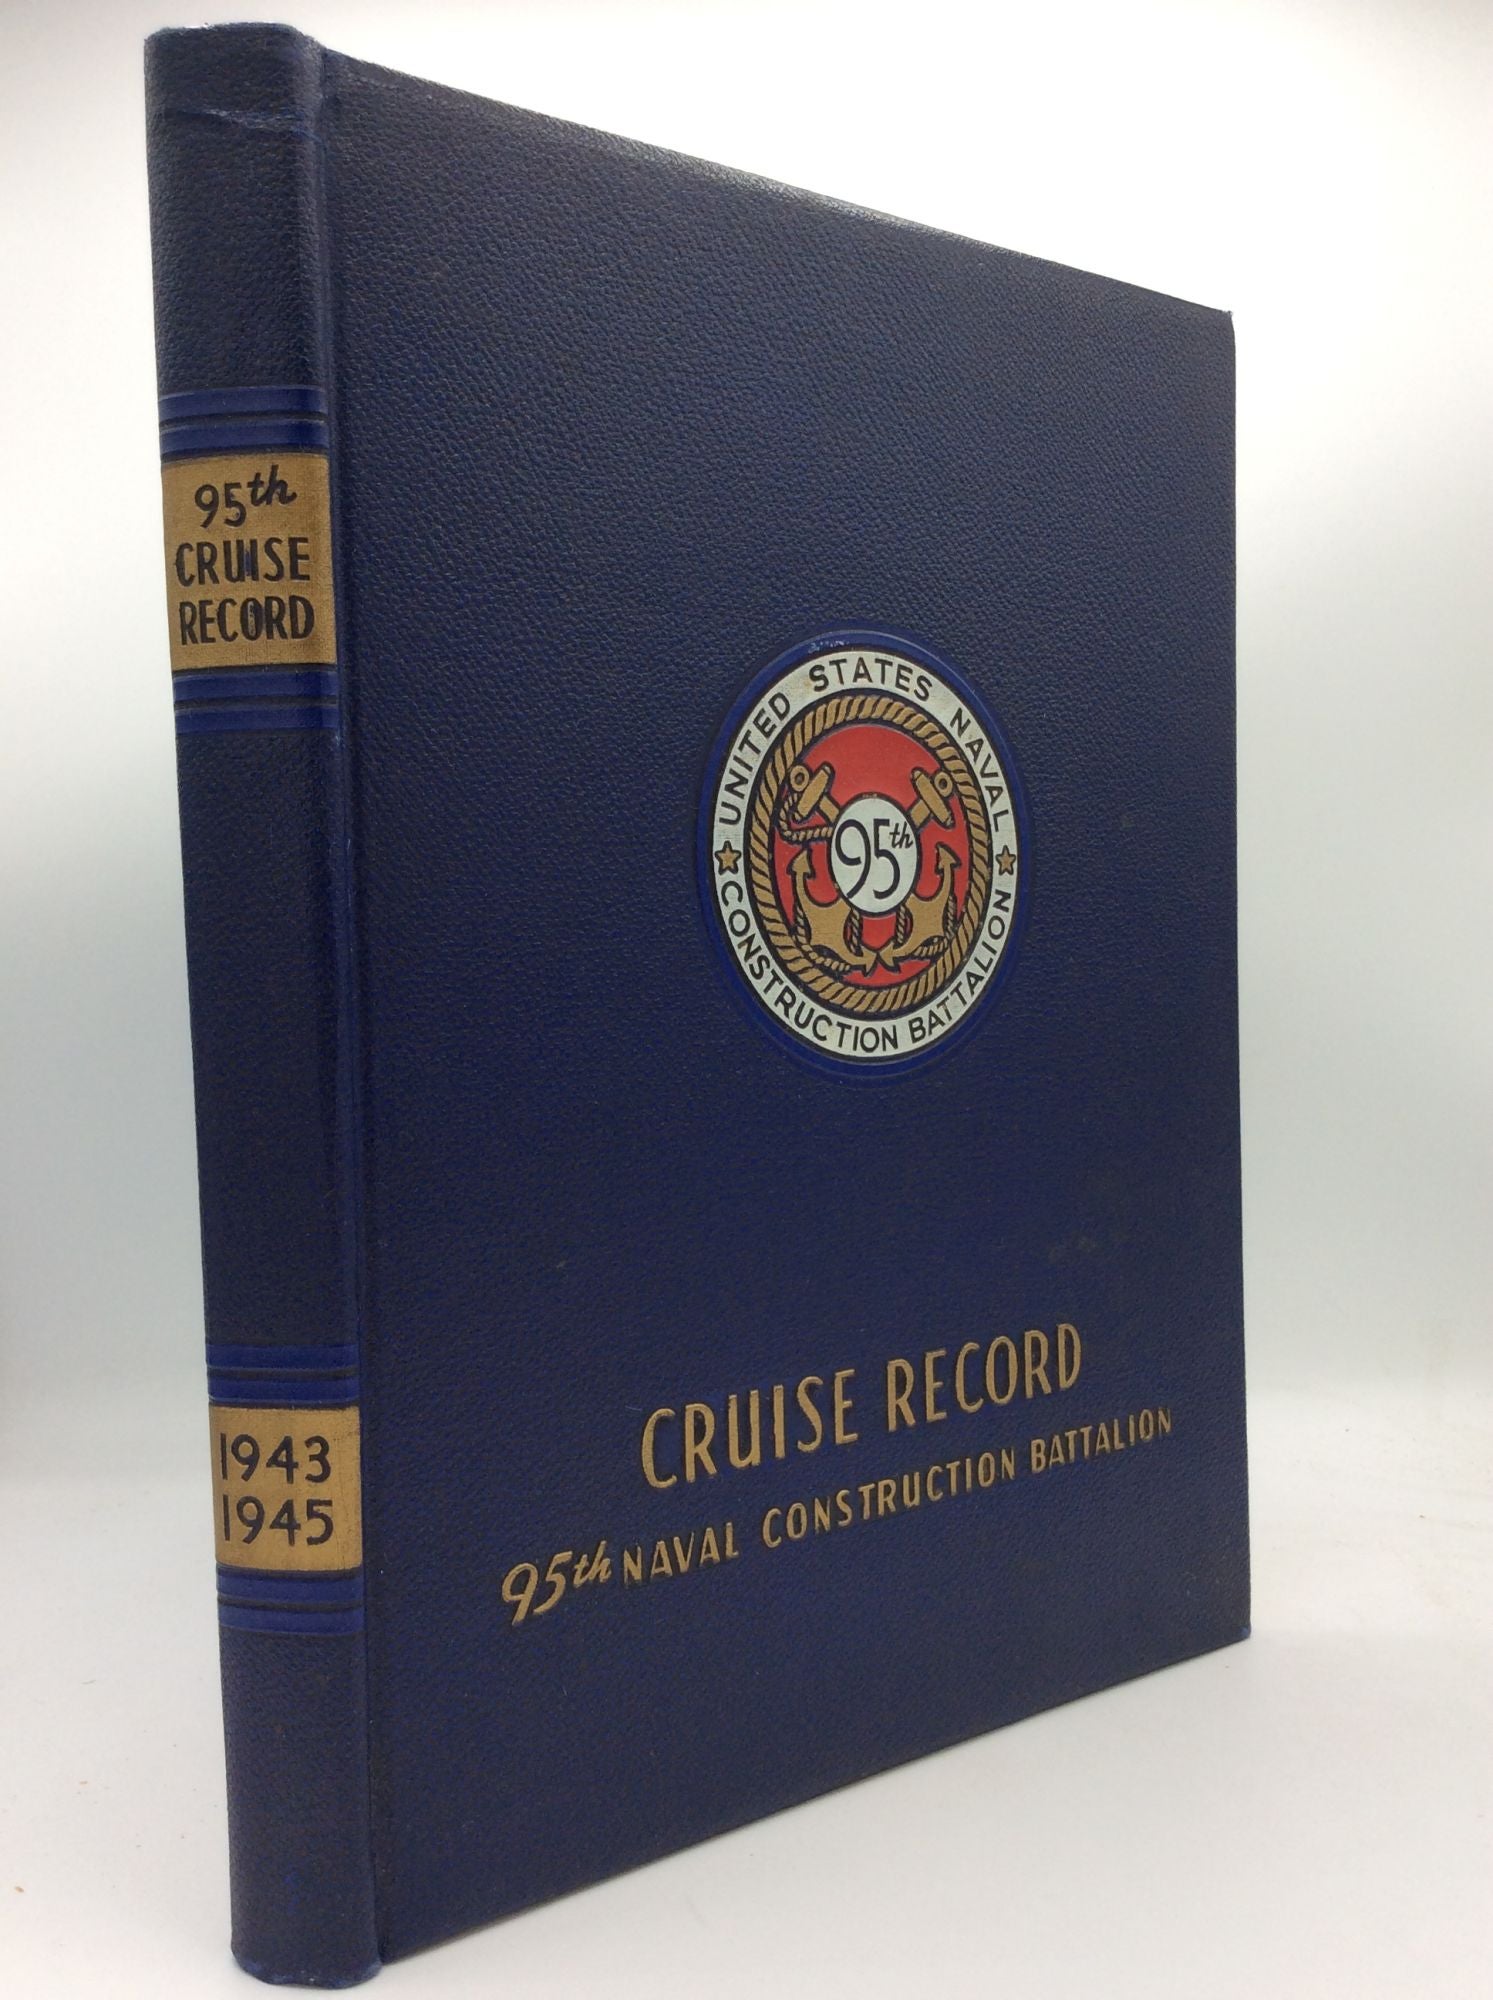  - The Cruise Record of the 95th United States Naval Construction Battalion, April 1943 - September 1945